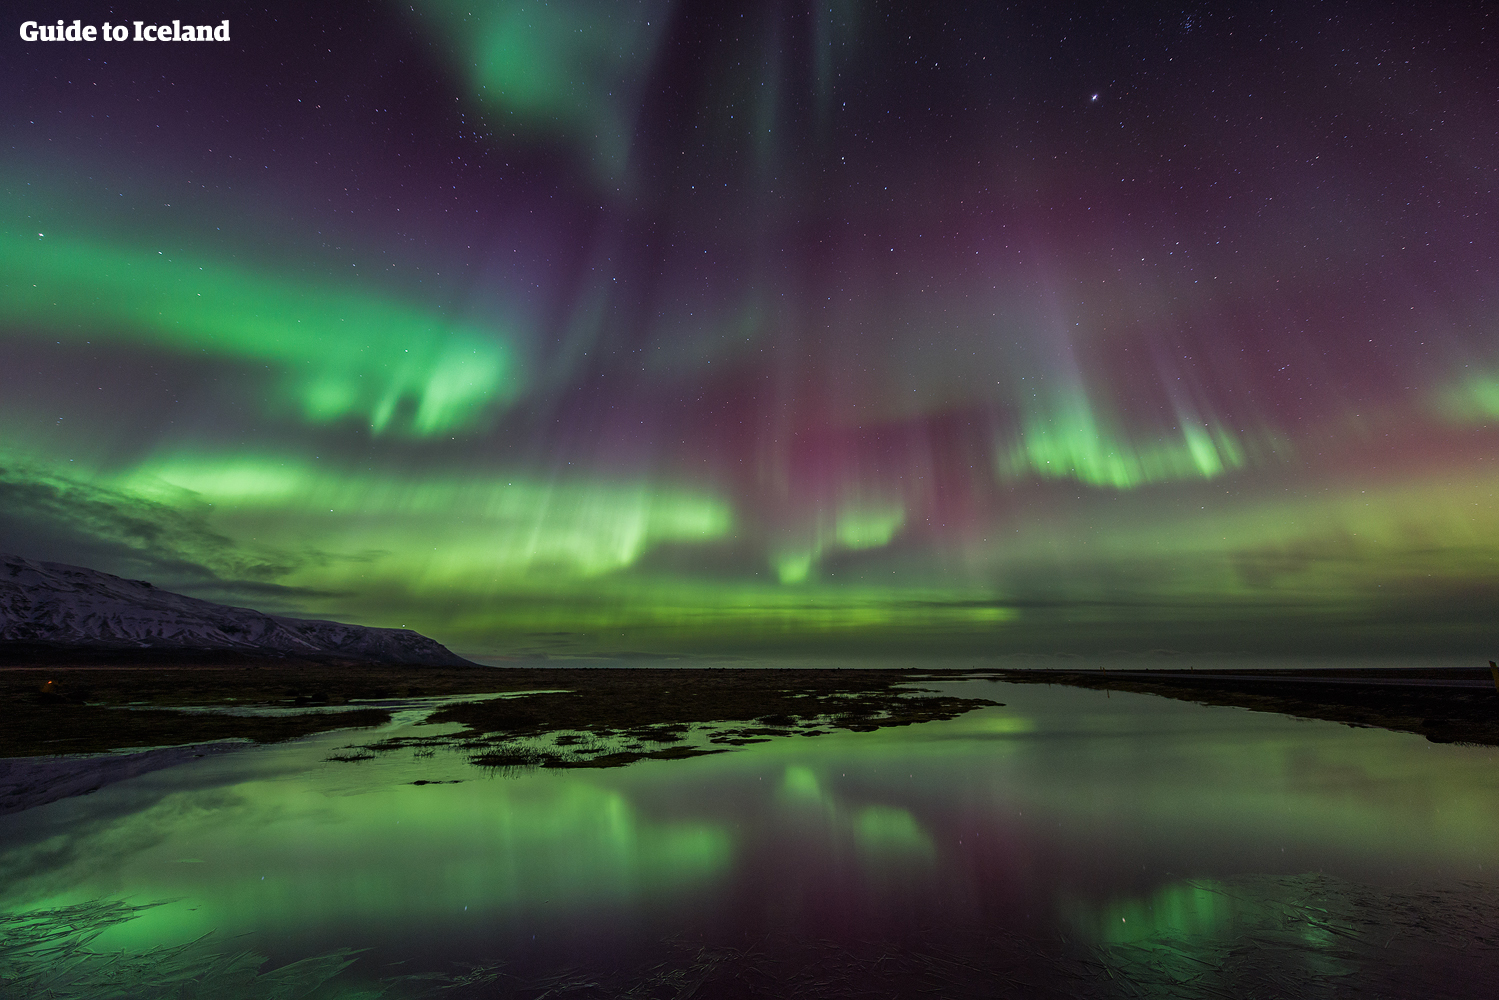 The word 'Aurora' is derived from the Latin words for 'Dawn' and 'Light'.